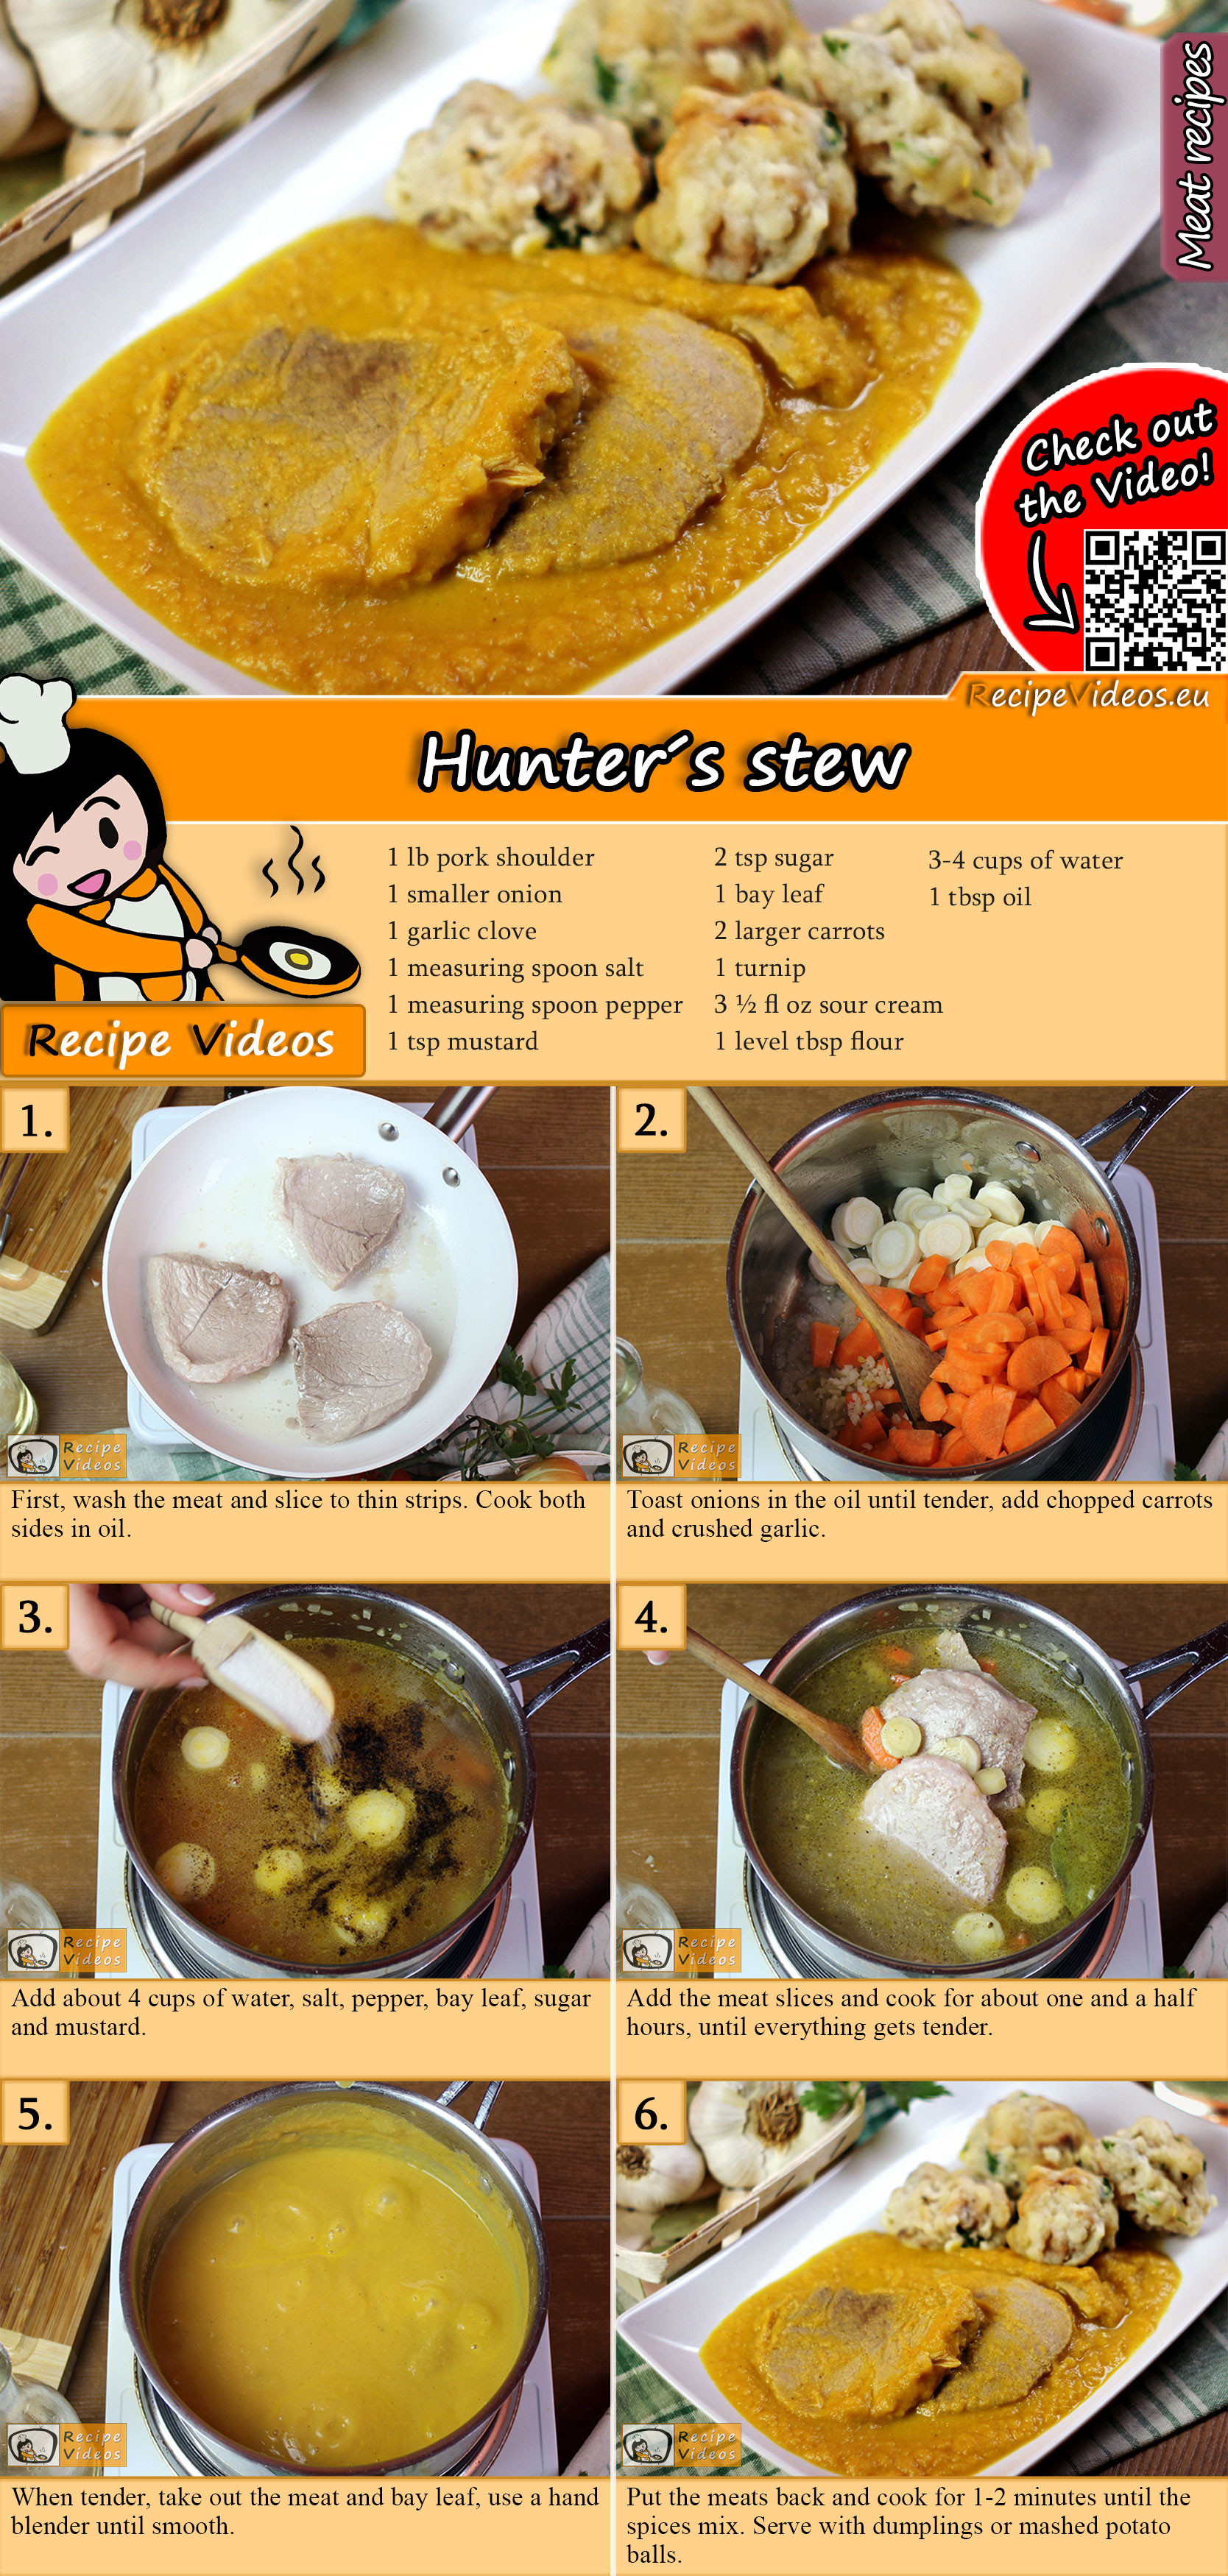 Hunter’s stew recipe with video